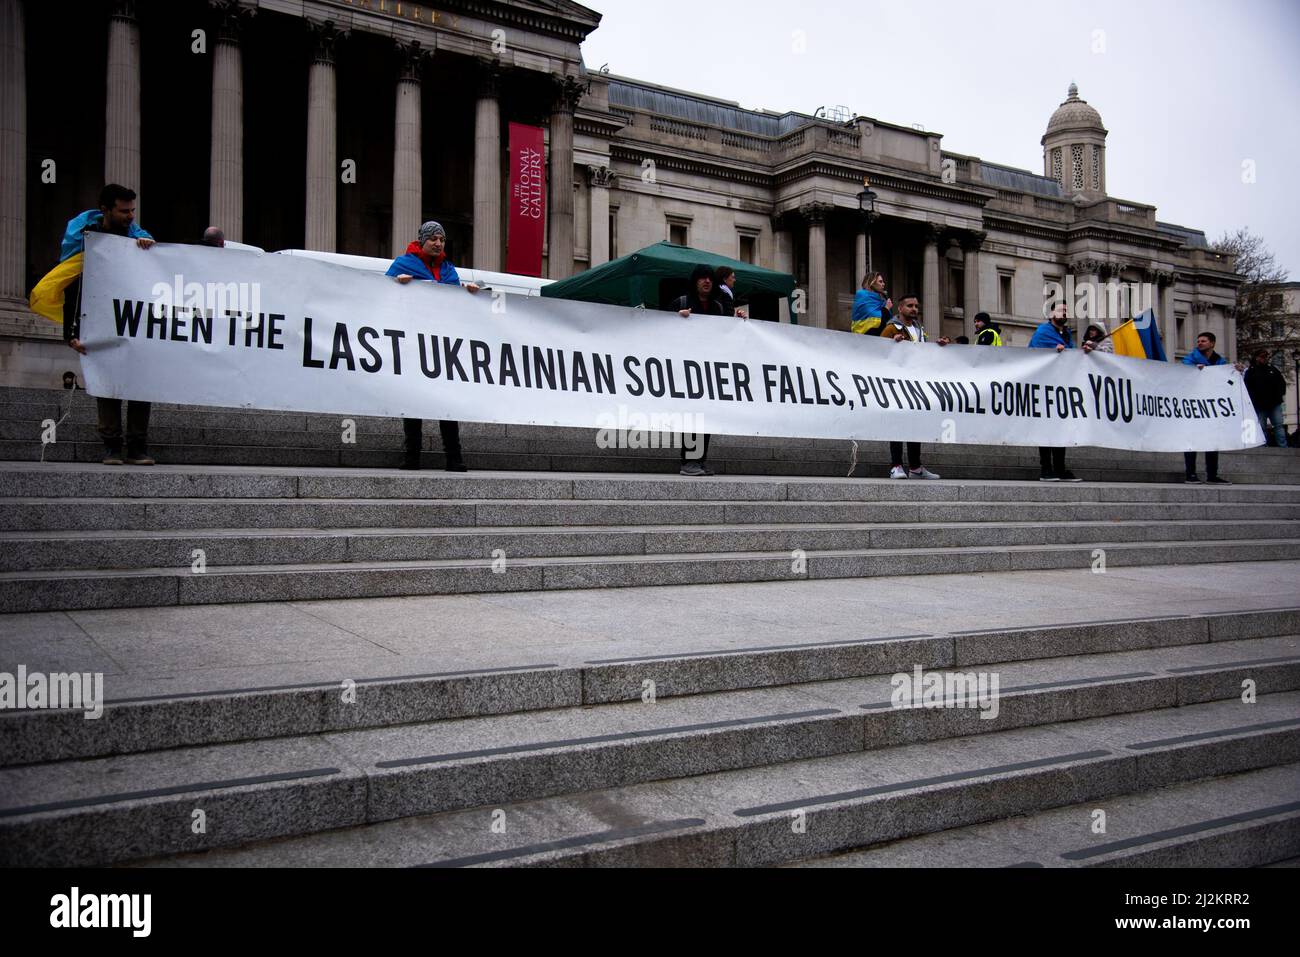 London, UK. 02nd Apr, 2022. Protestors hold a large banner on the stairs during the demonstration at Trafalgar Square. Protests continued in London's Trafalgar Square in solidarity with the people of Ukraine, as war continues to rage due to the Russian invasion. Credit: SOPA Images Limited/Alamy Live News Stock Photo